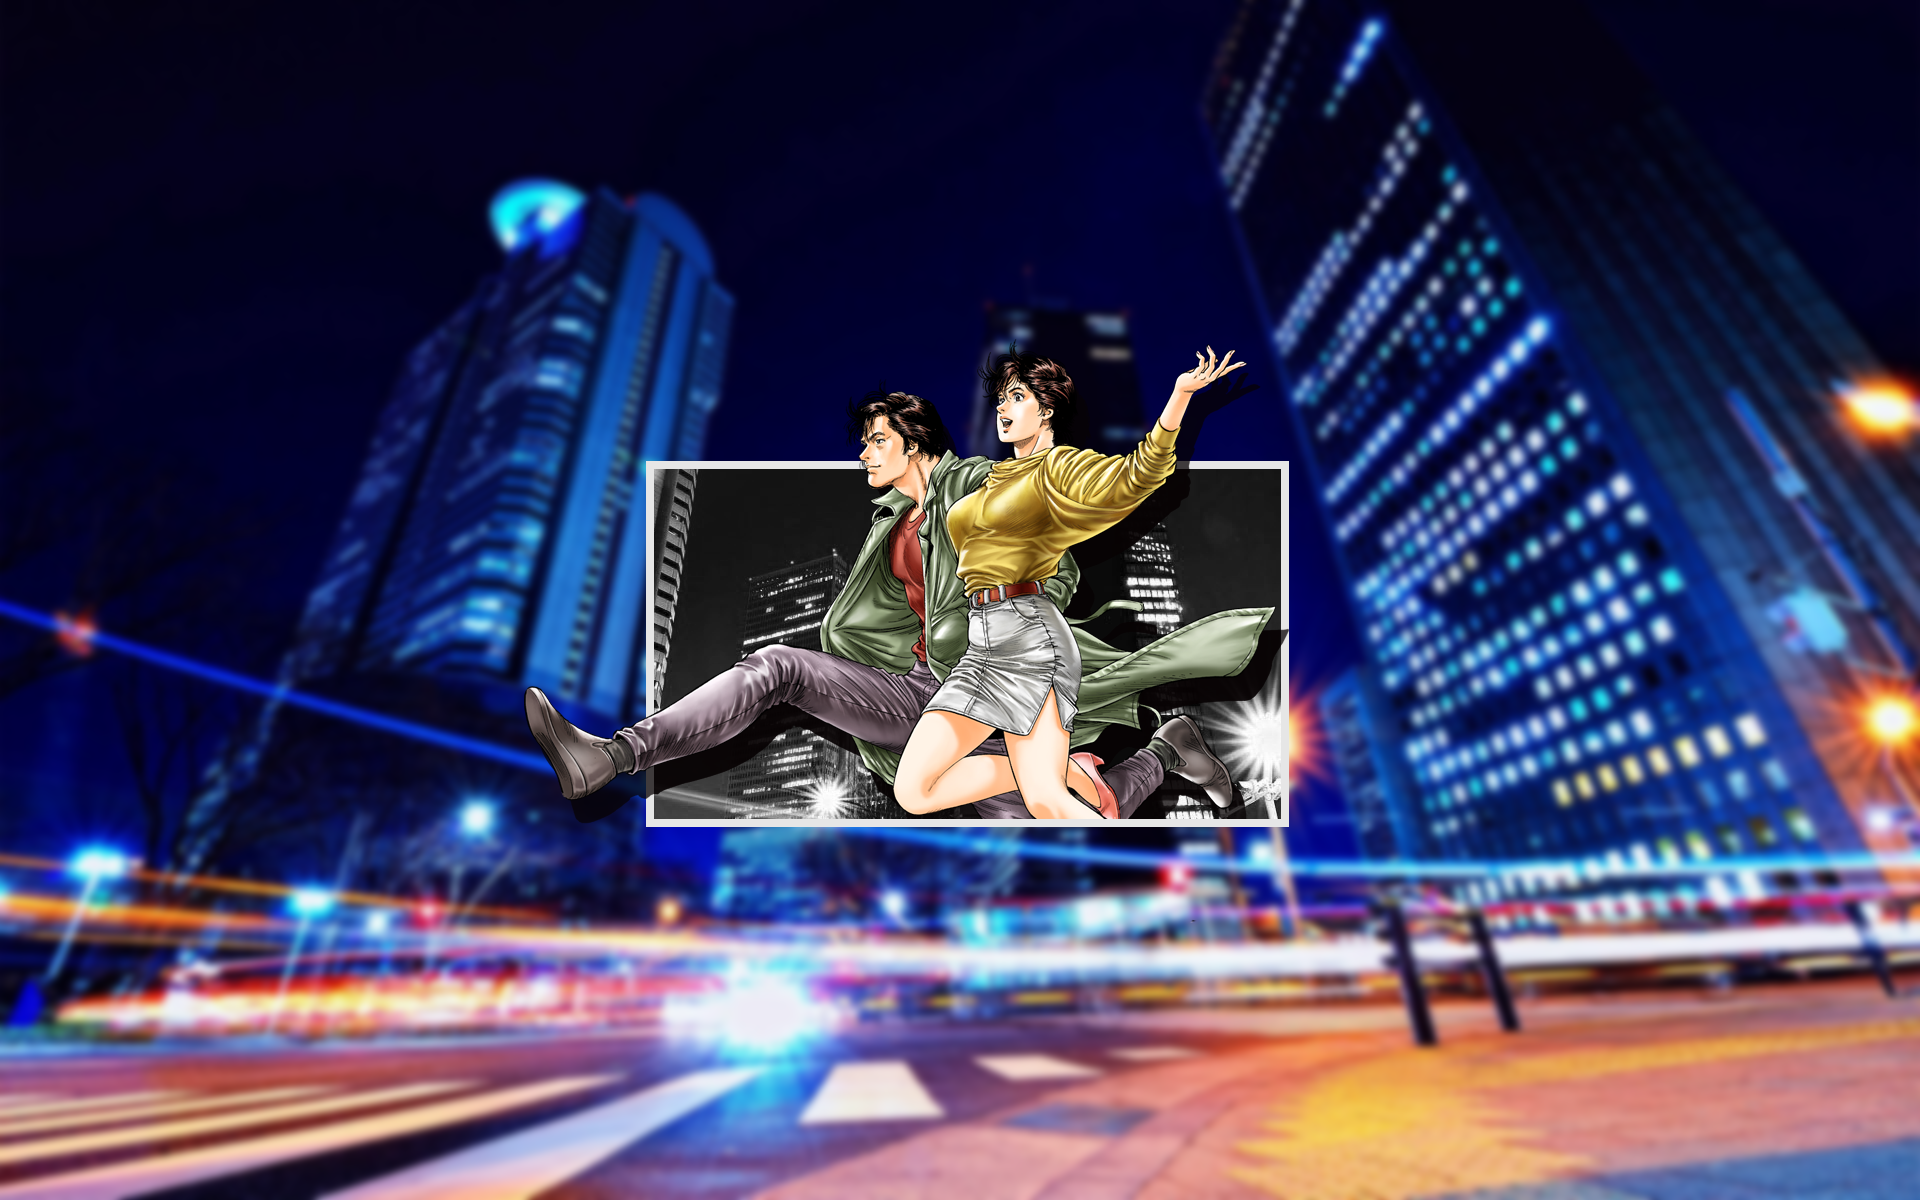 City Hunter Anime Piture In Picture Anime Girls Picture In Picture 1920x1200